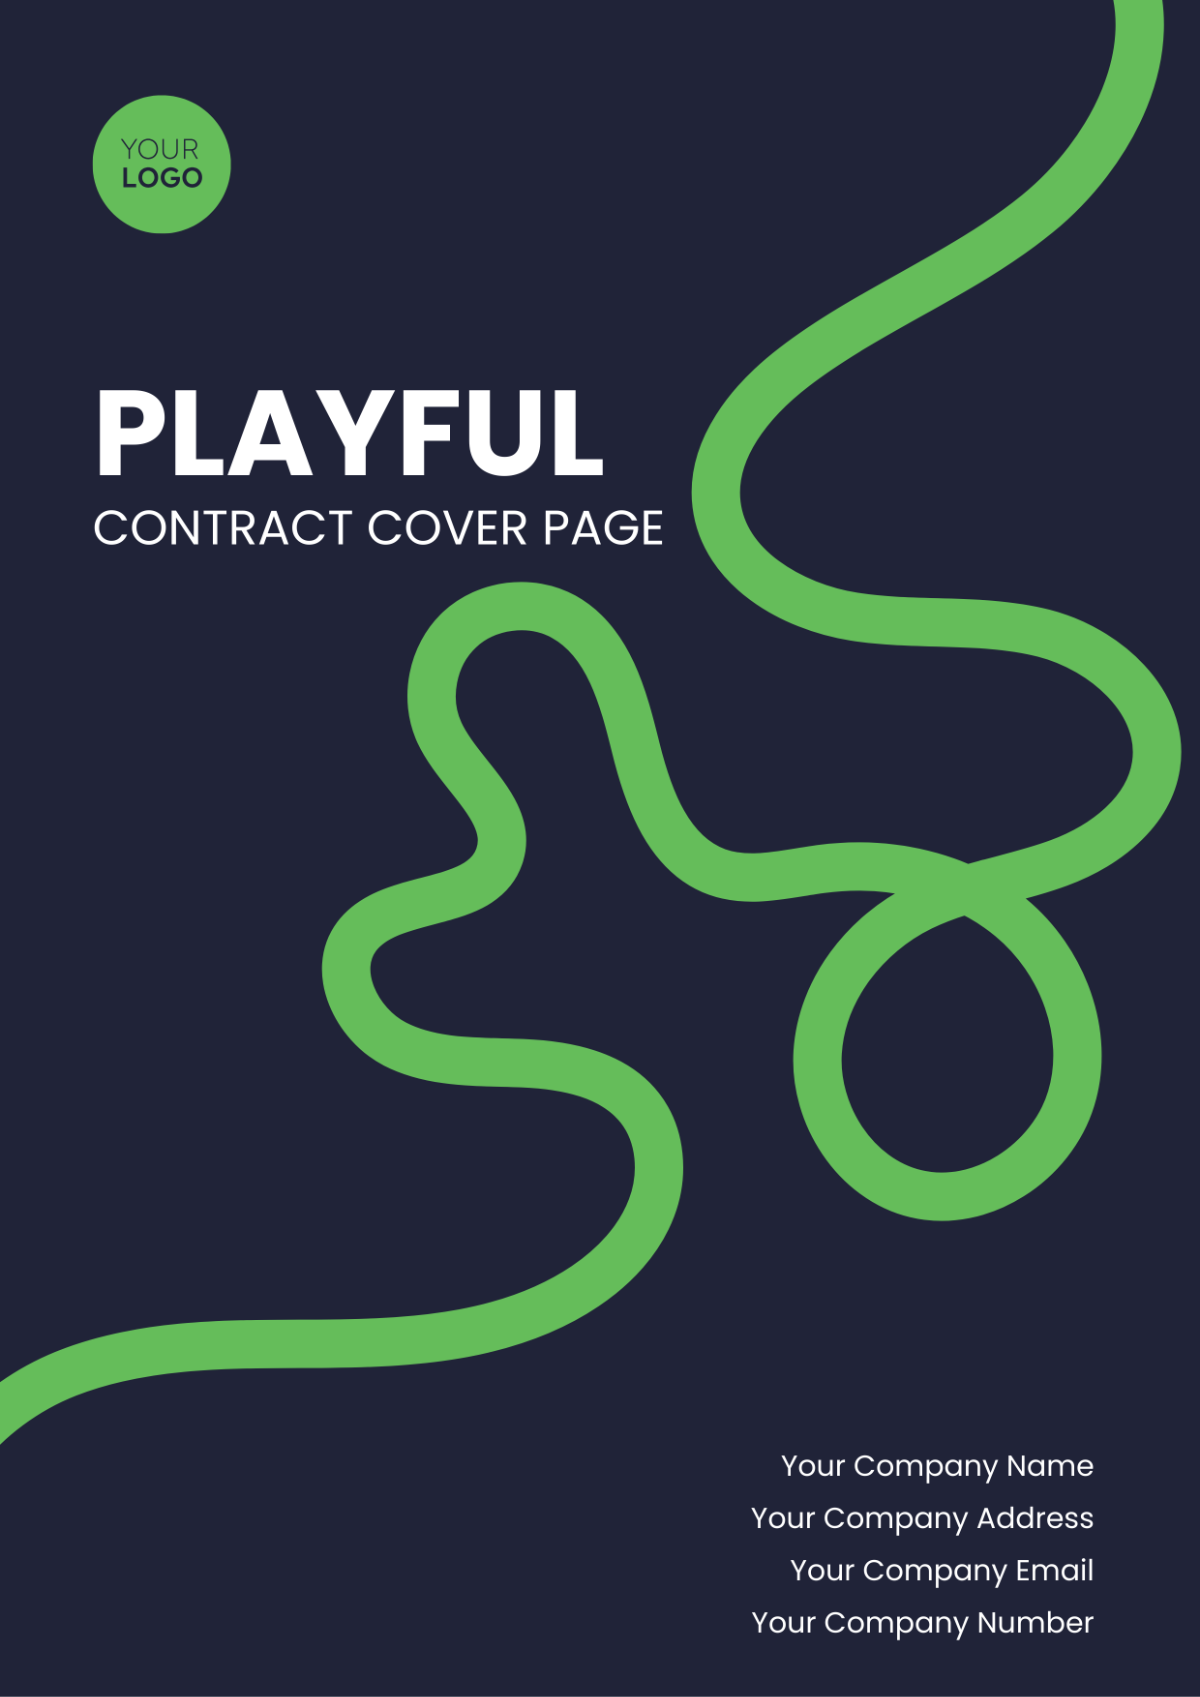 Playful Contract Cover Page